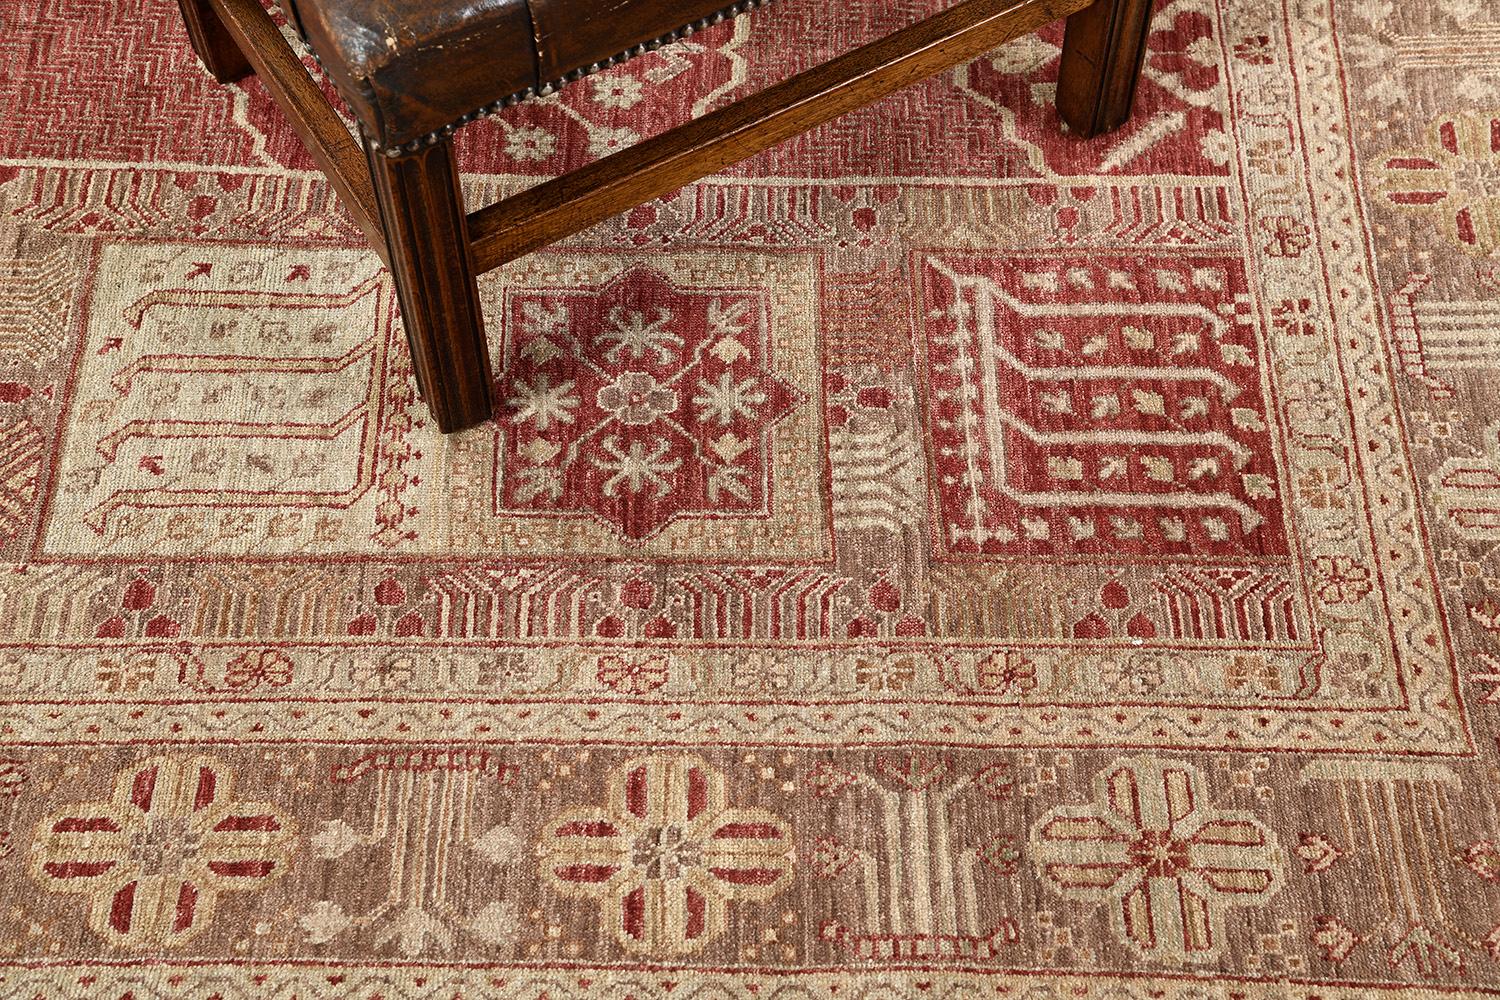 This impressive rug revival features floral vines and symbolic motifs over beautiful wool in gold and red theme. A beautiful border with a natural scheme shows floral motifs that give this rug a sophisticated aesthetic. Best suits to your